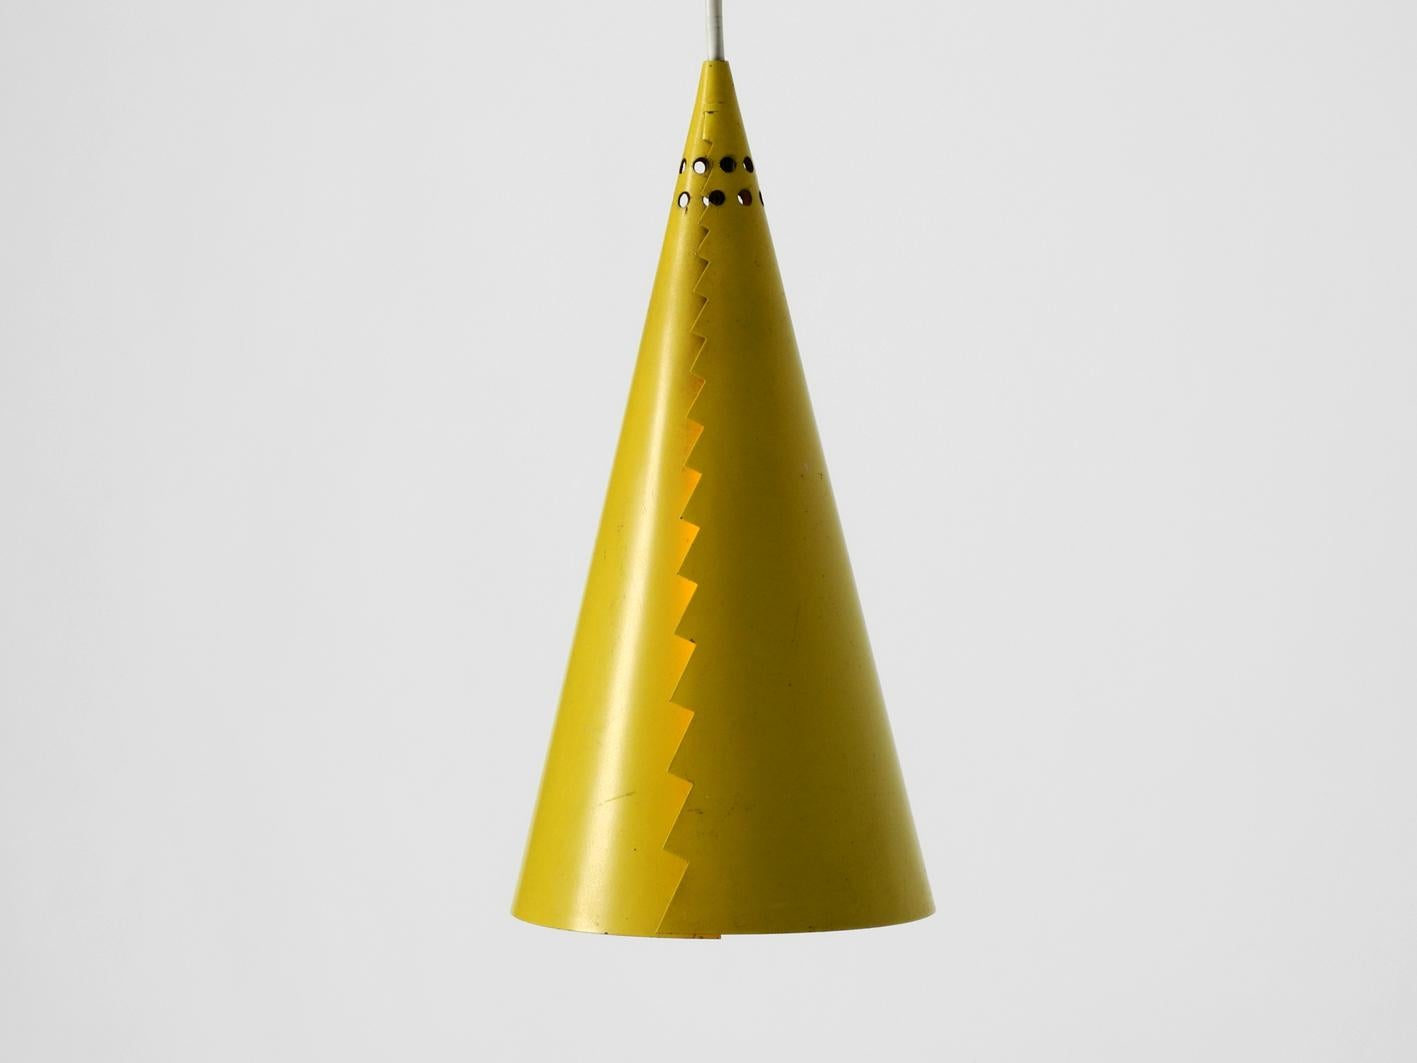 Gorgeous rare large original Mid-Century Modern yellow metal pendant
lamp from Italy. Funny futuristic 1950s cone design in very good original condition.
One original metal E27 socket. Very good vintage condition, no damages to
the lamp, no bumps